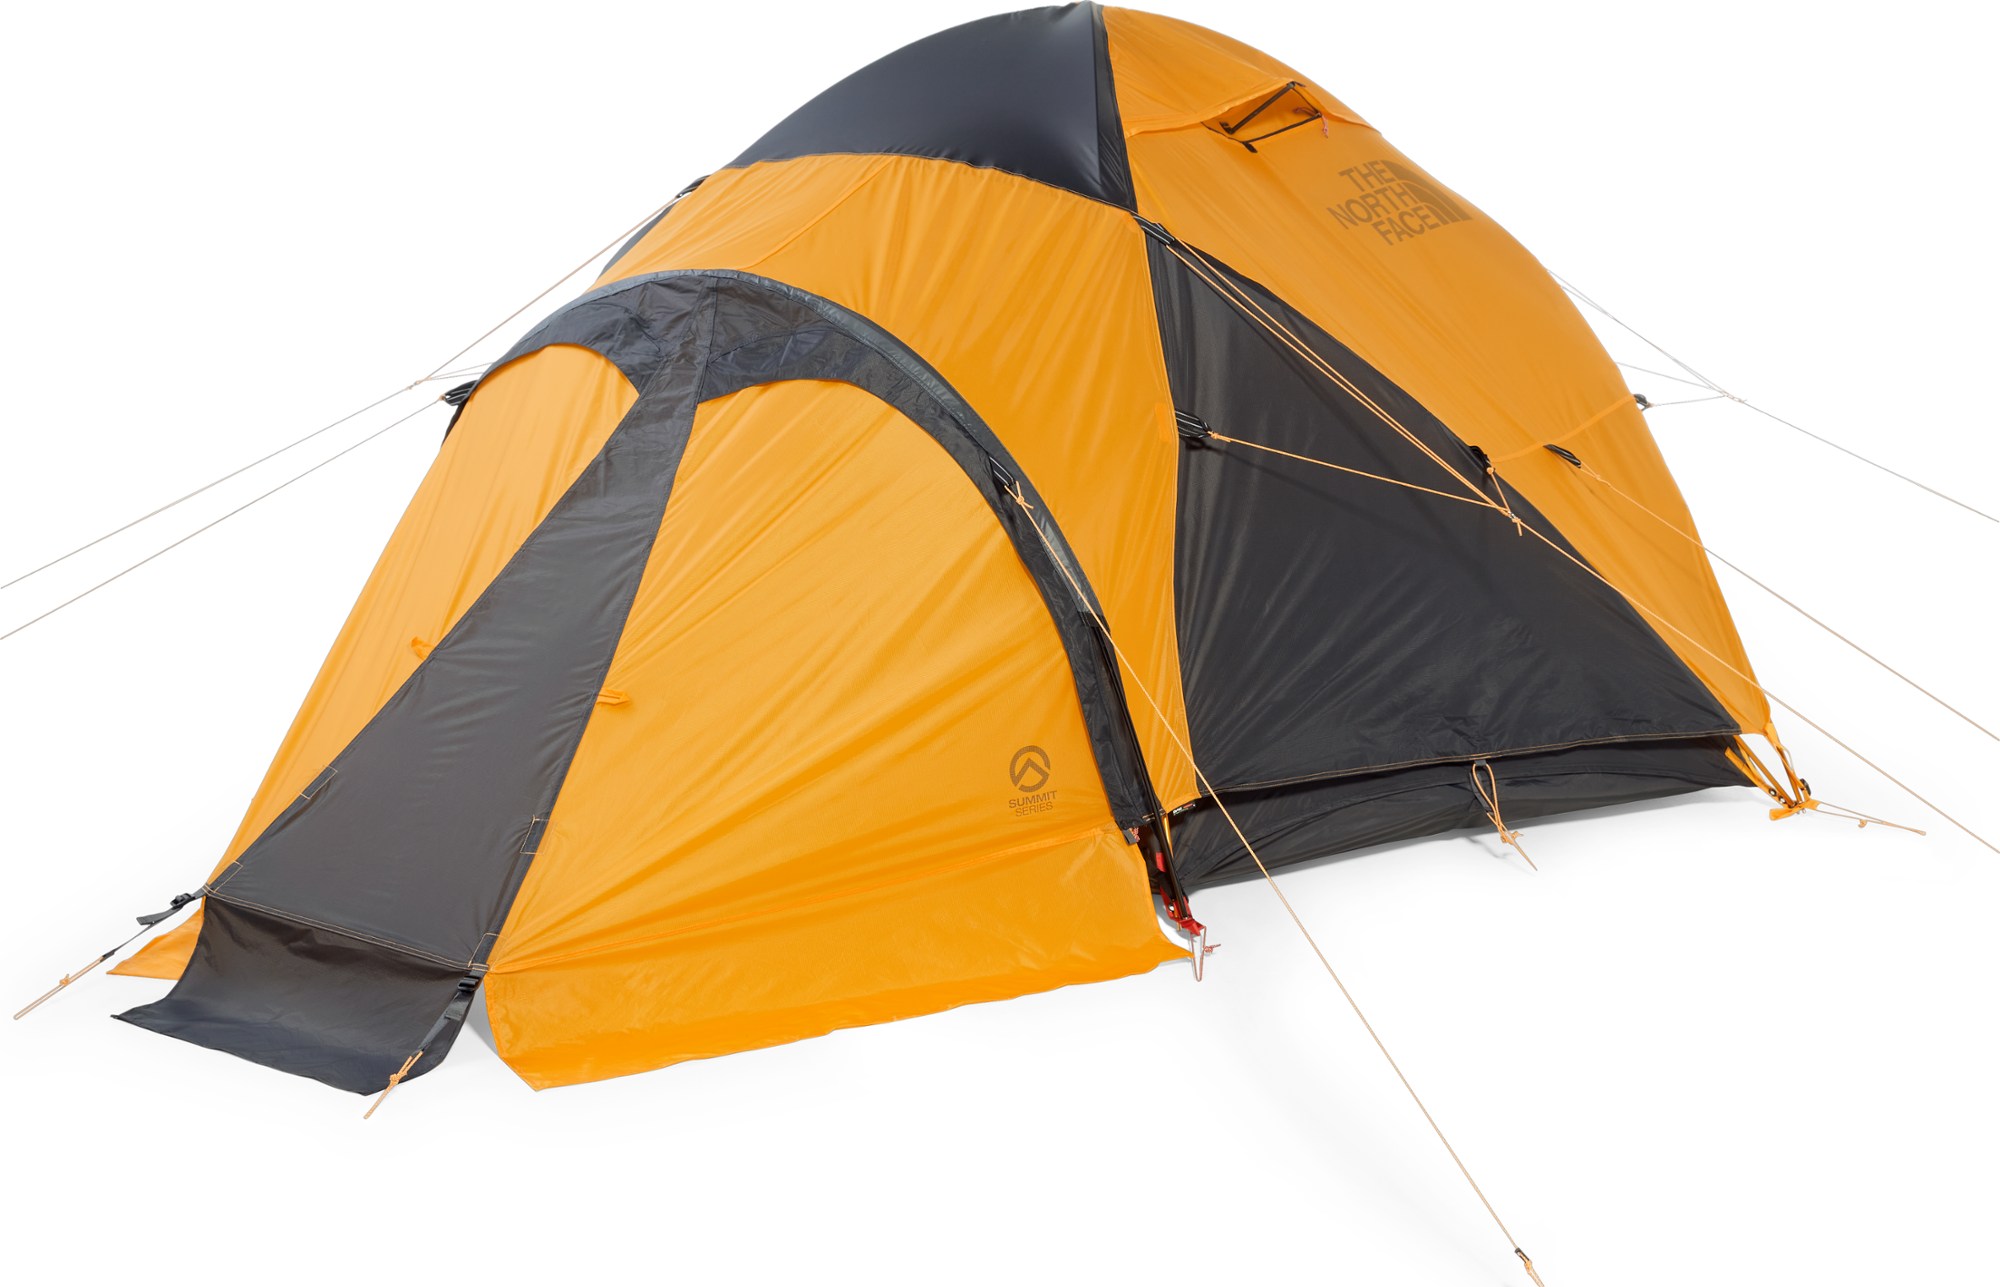 The North Face VE 25 4-season tent